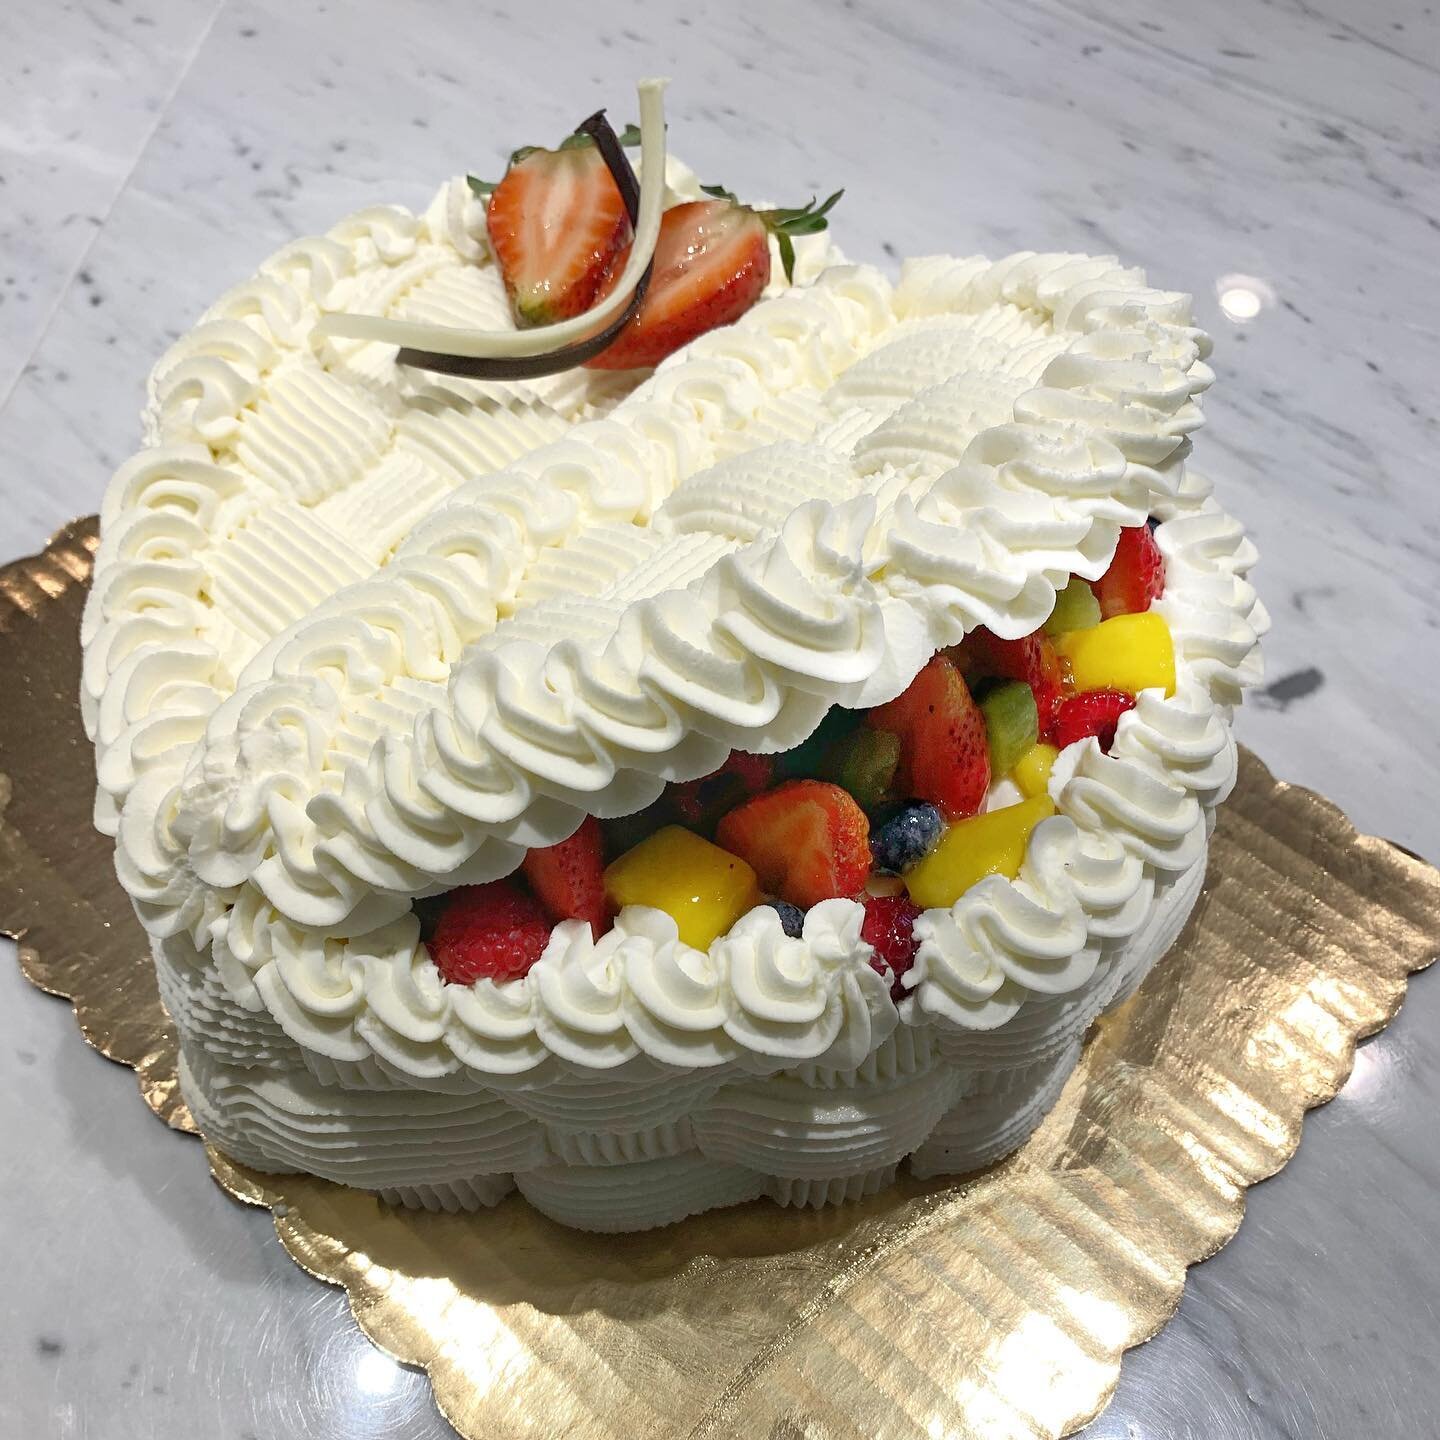 We&rsquo;re only 3 days away from Galentine&rsquo;s Day and 4 days away from Valentine&rsquo;s Day, friends! If you want to steal the show and heart of your loved one, we highly recommend this heart-shaped fruit-filled basked cake. It&rsquo;s so much